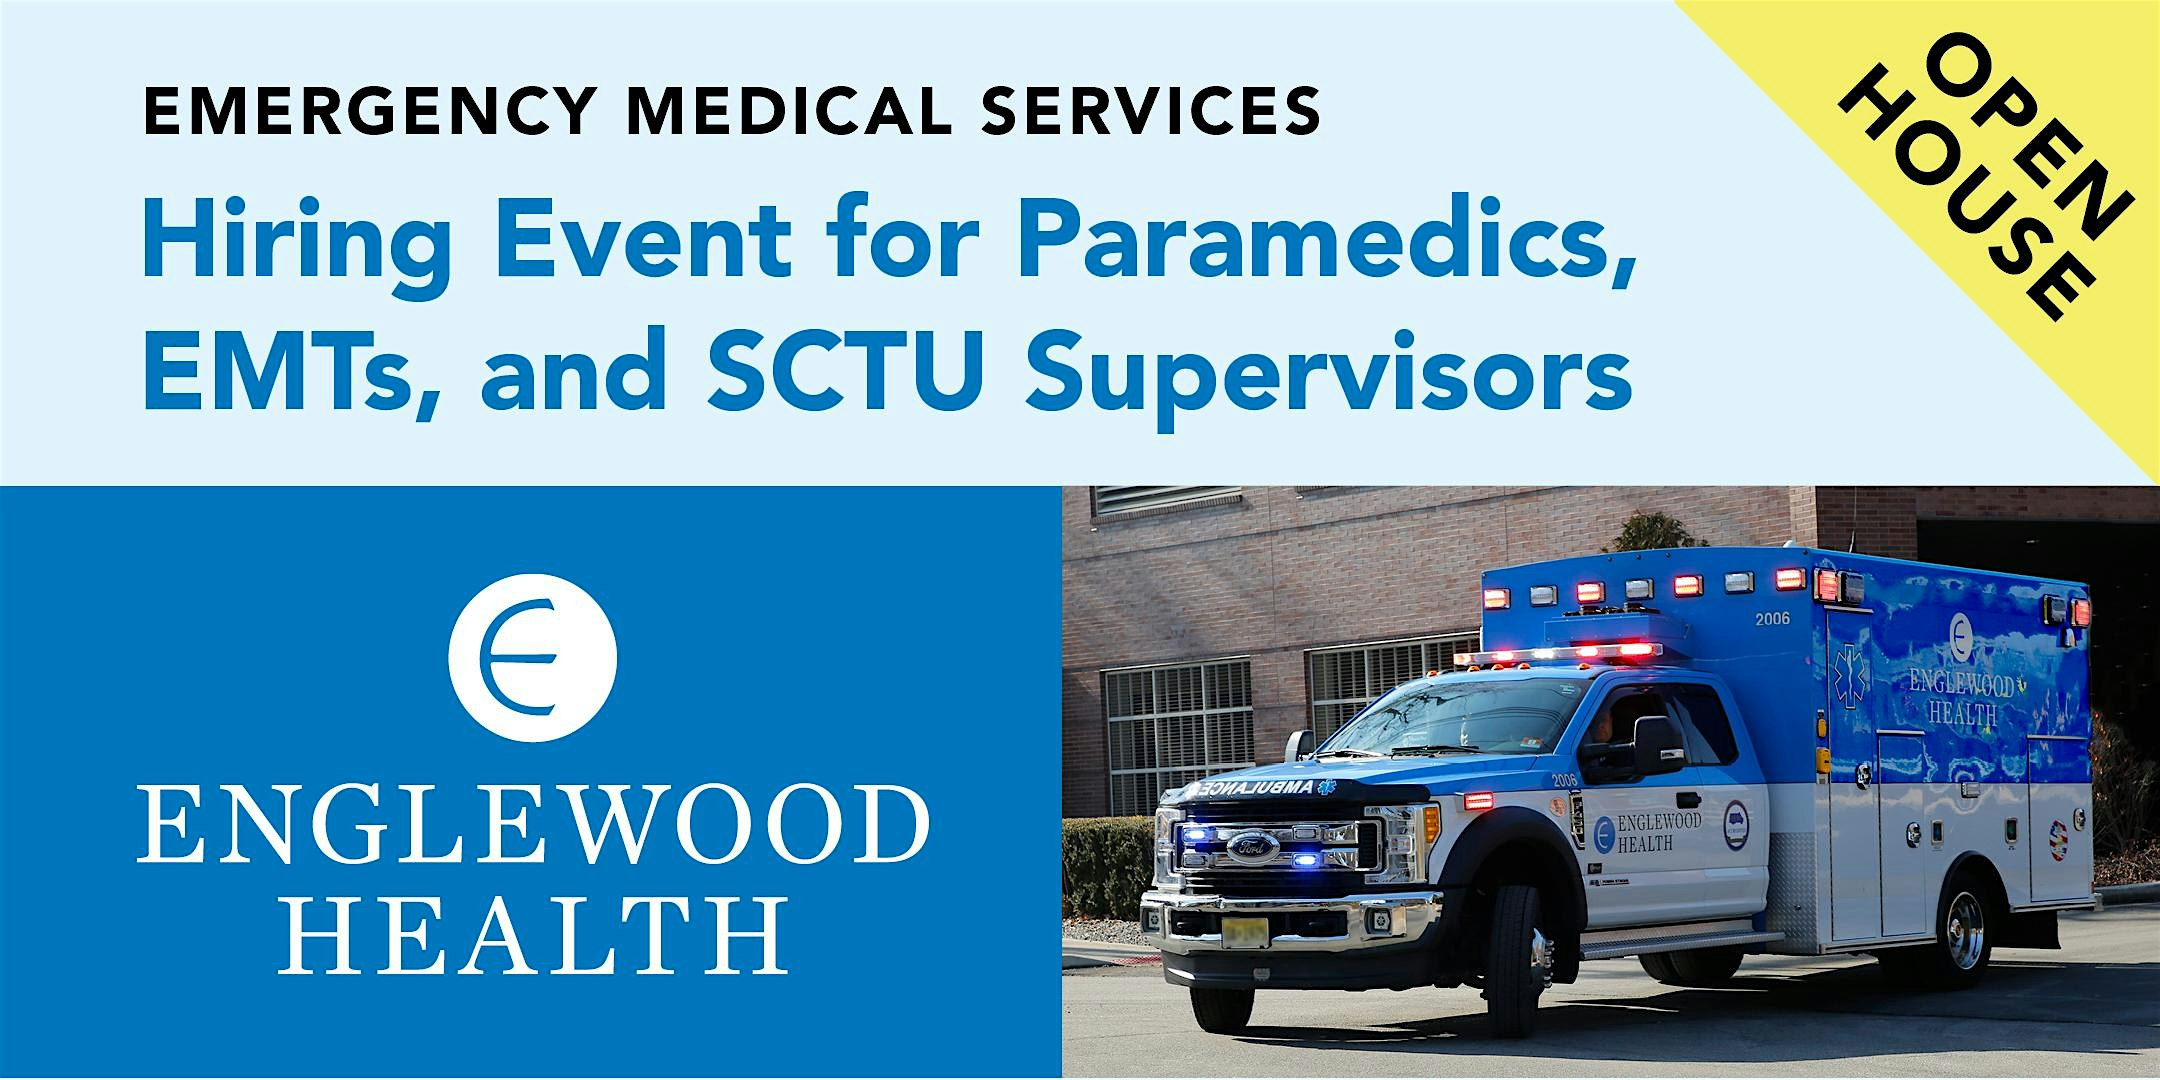 More info: Englewood Health EMS Open House Hiring Event